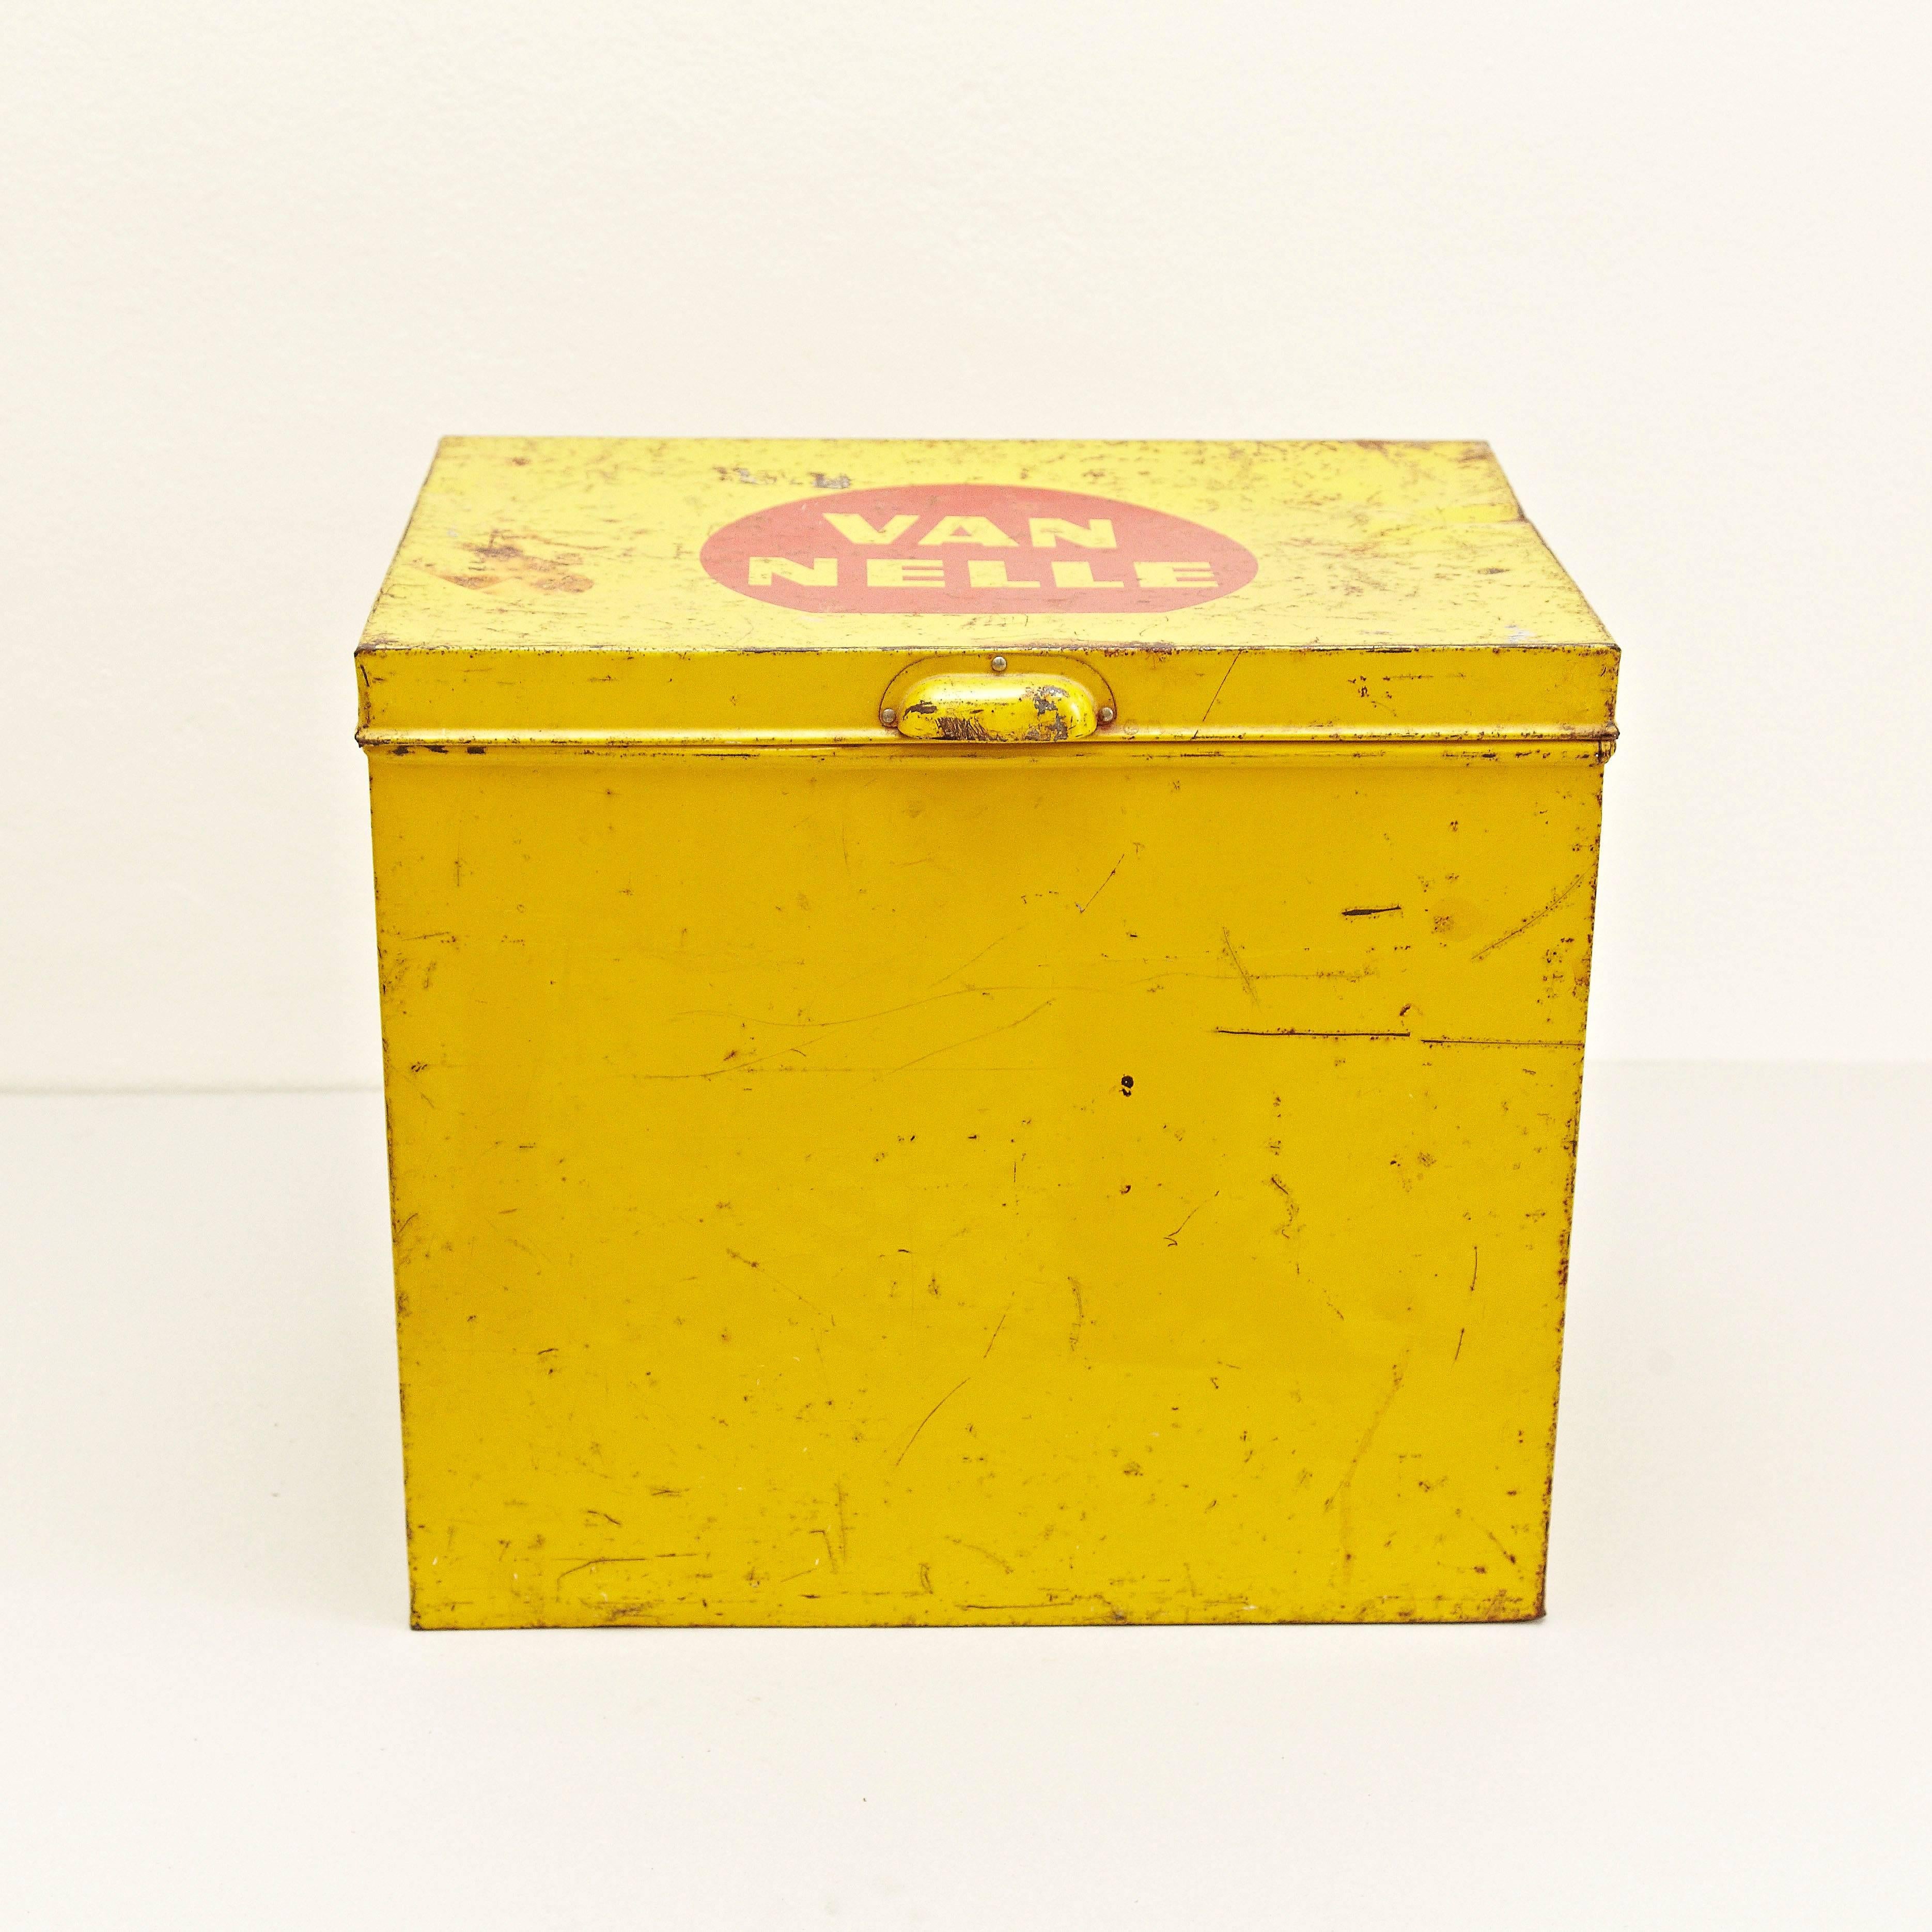 Tea box designed by Jacques Jongert around 1930 in ' De Stijl ' design manufactured for Van Nelle in Netherland.

Metal, painted in color

In good original condition, with minor wear consistent with age and use, preserving a beautiful patina.